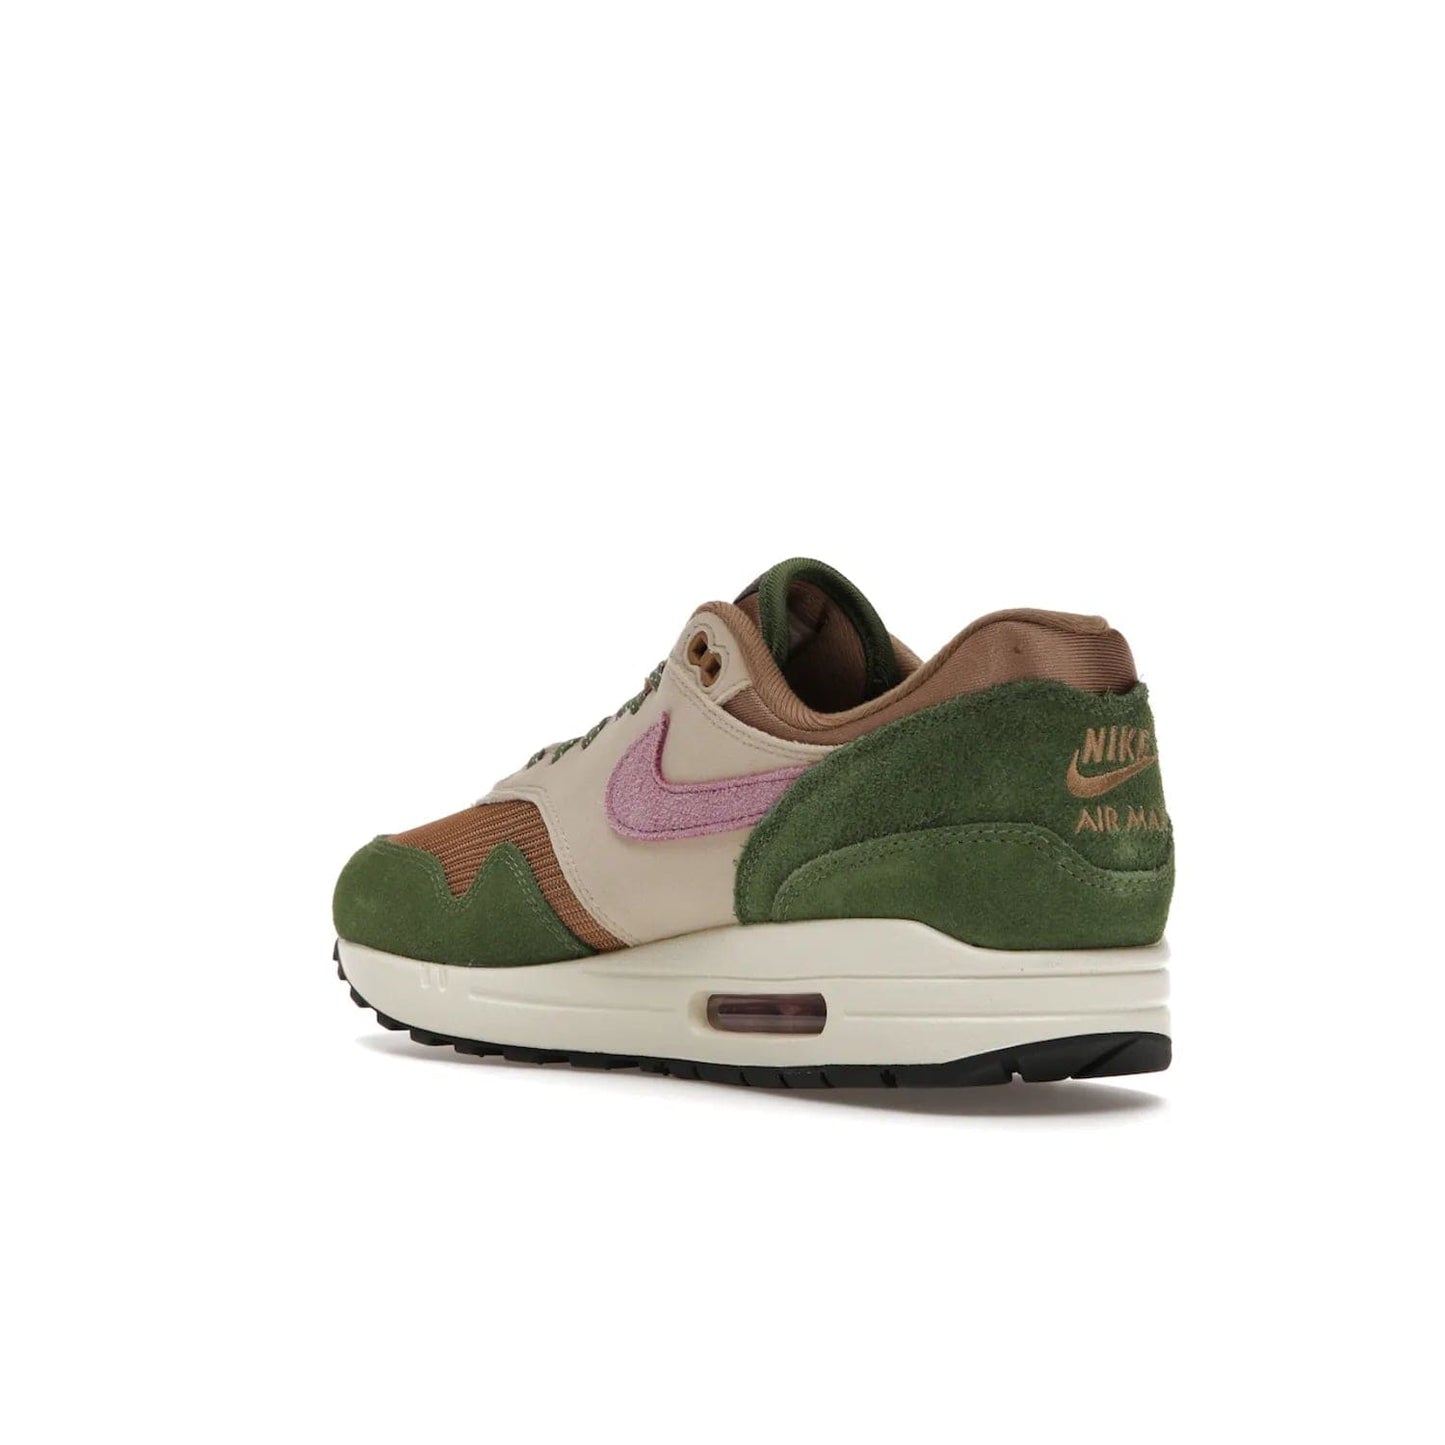 Nike Air Max 1 SH Treeline - Image 24 - Only at www.BallersClubKickz.com - A classic Nike Air Max 1 SH Treeline with a brown mesh upper, taupe Durabuck overlays, and hairy green suede details. Light Bordeaux Swoosh and woven tongue label for a pop of color. Released in May 2022. Perfect for any outfit and sure to impress.